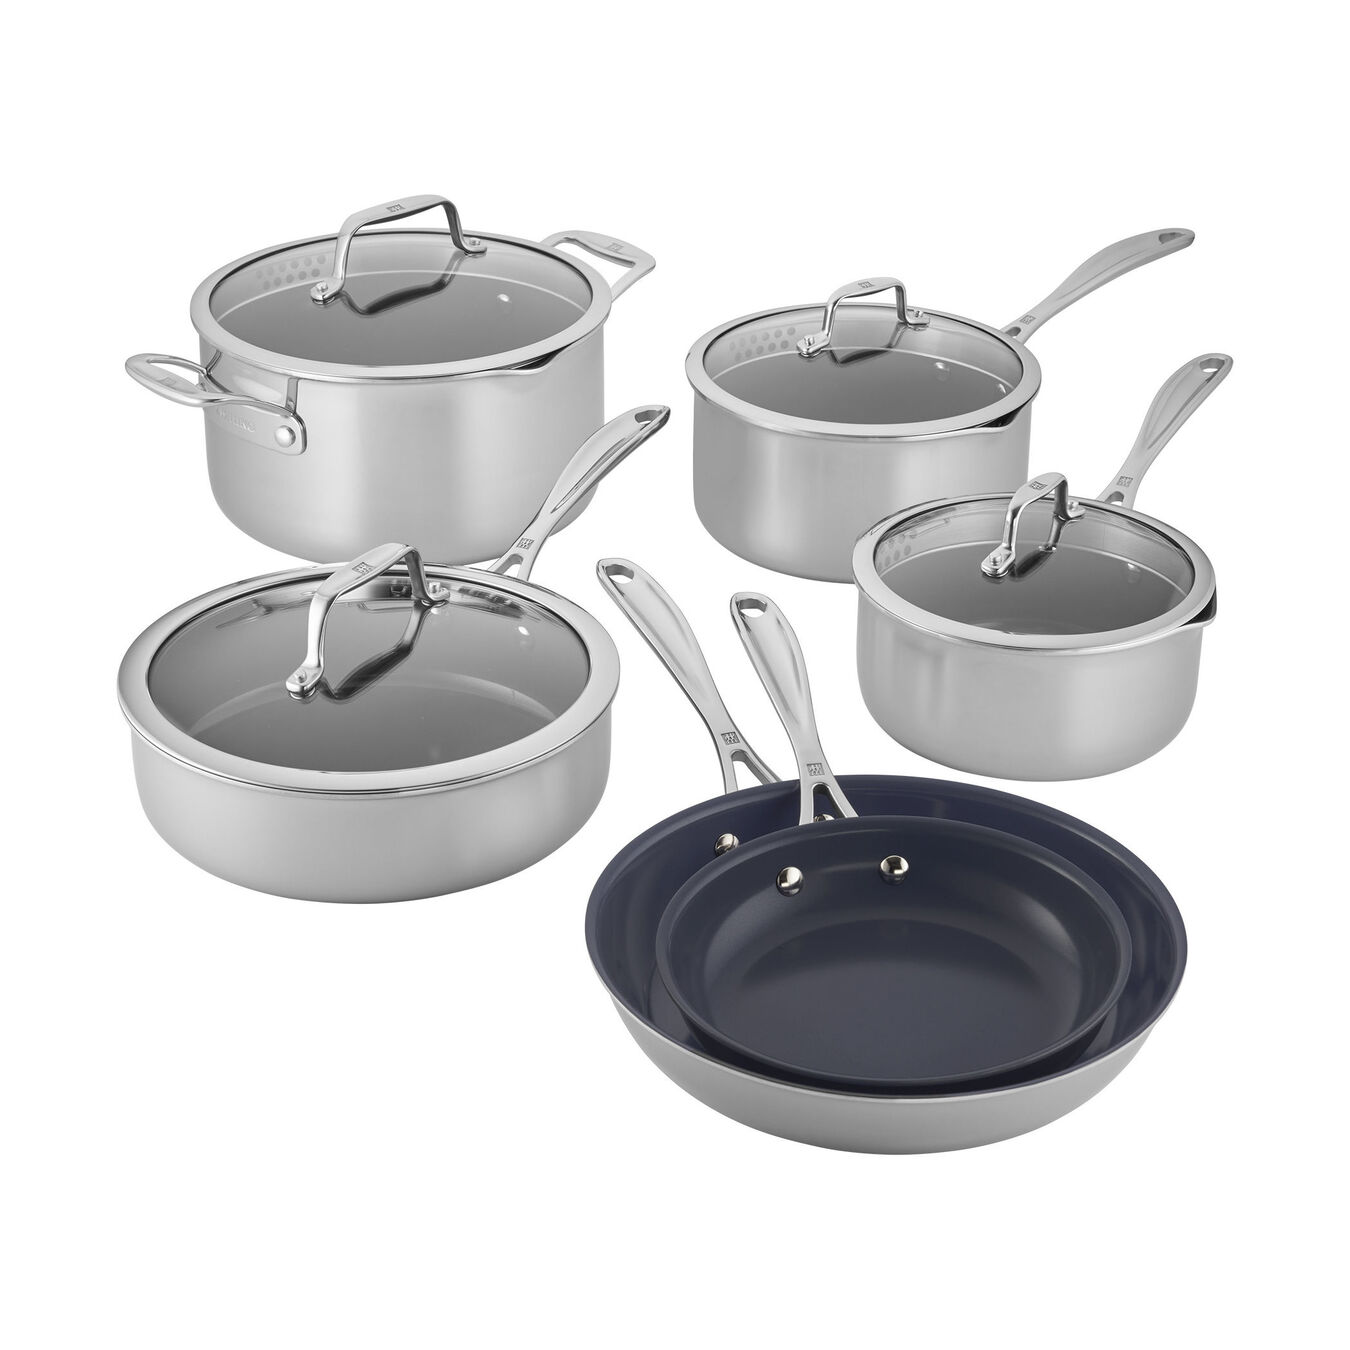 Zwilling pots and pans